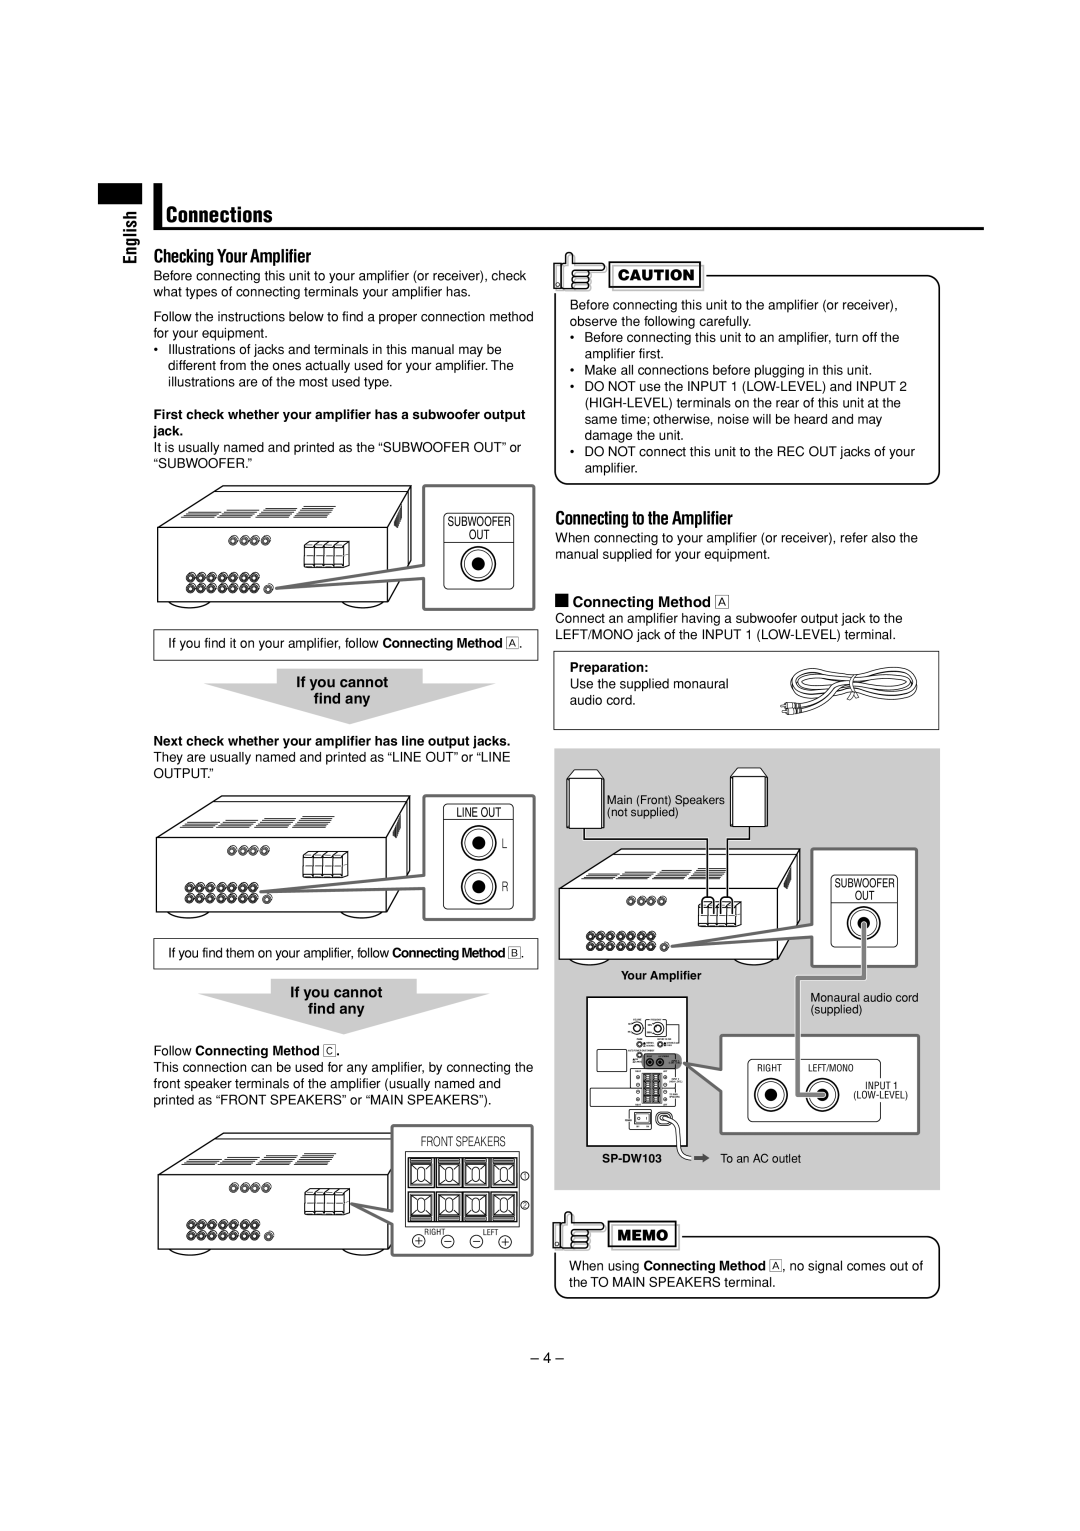 JVC SP-DW103 manual Connections, Checking Your Amplifier, Connecting to the Amplifier, English 